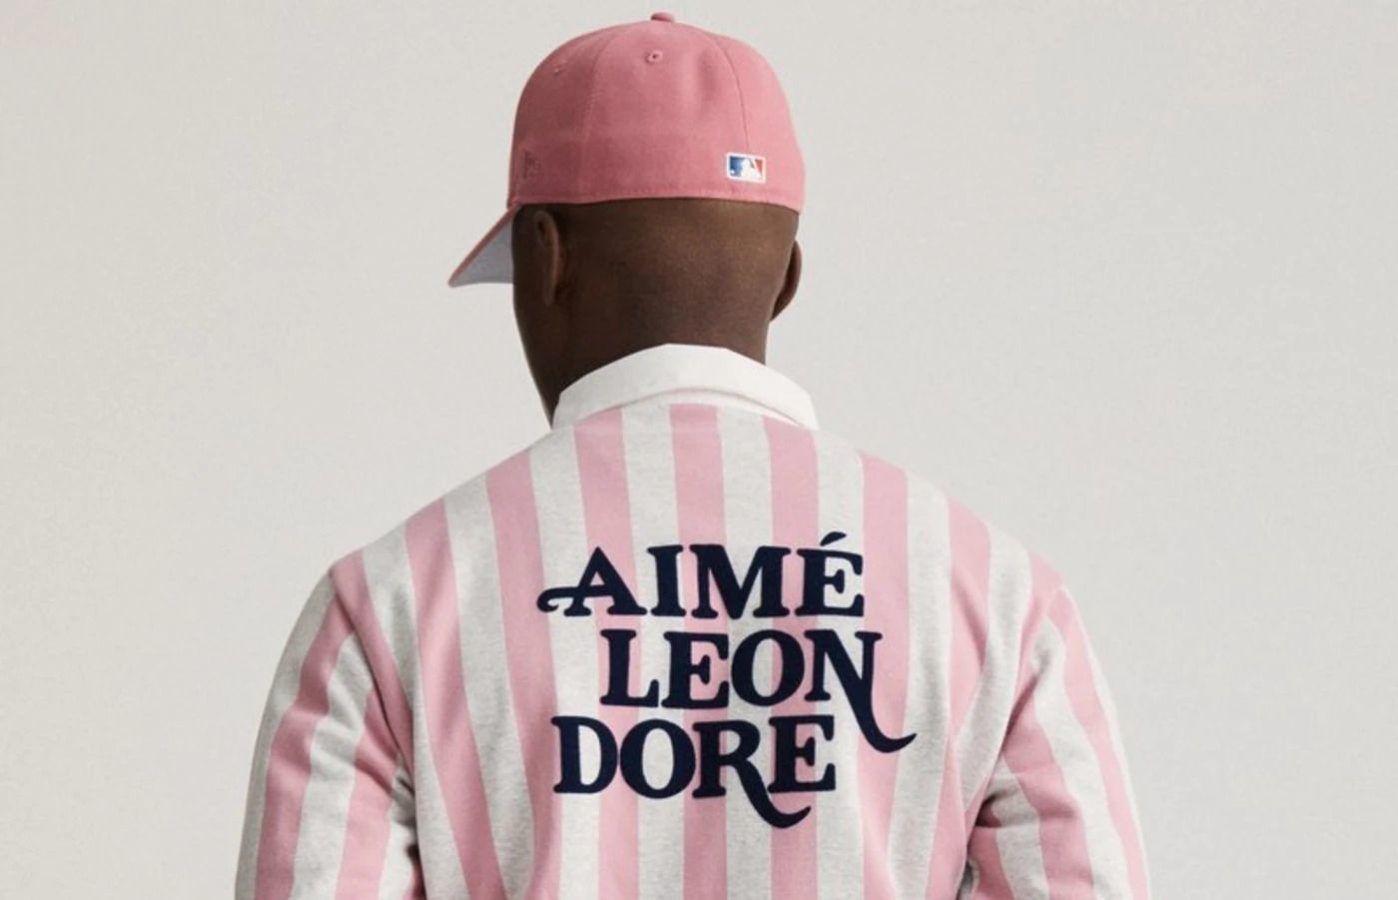 What We Know About LVMH’s Investment into Streetwear Brand Aimé Leon Dore